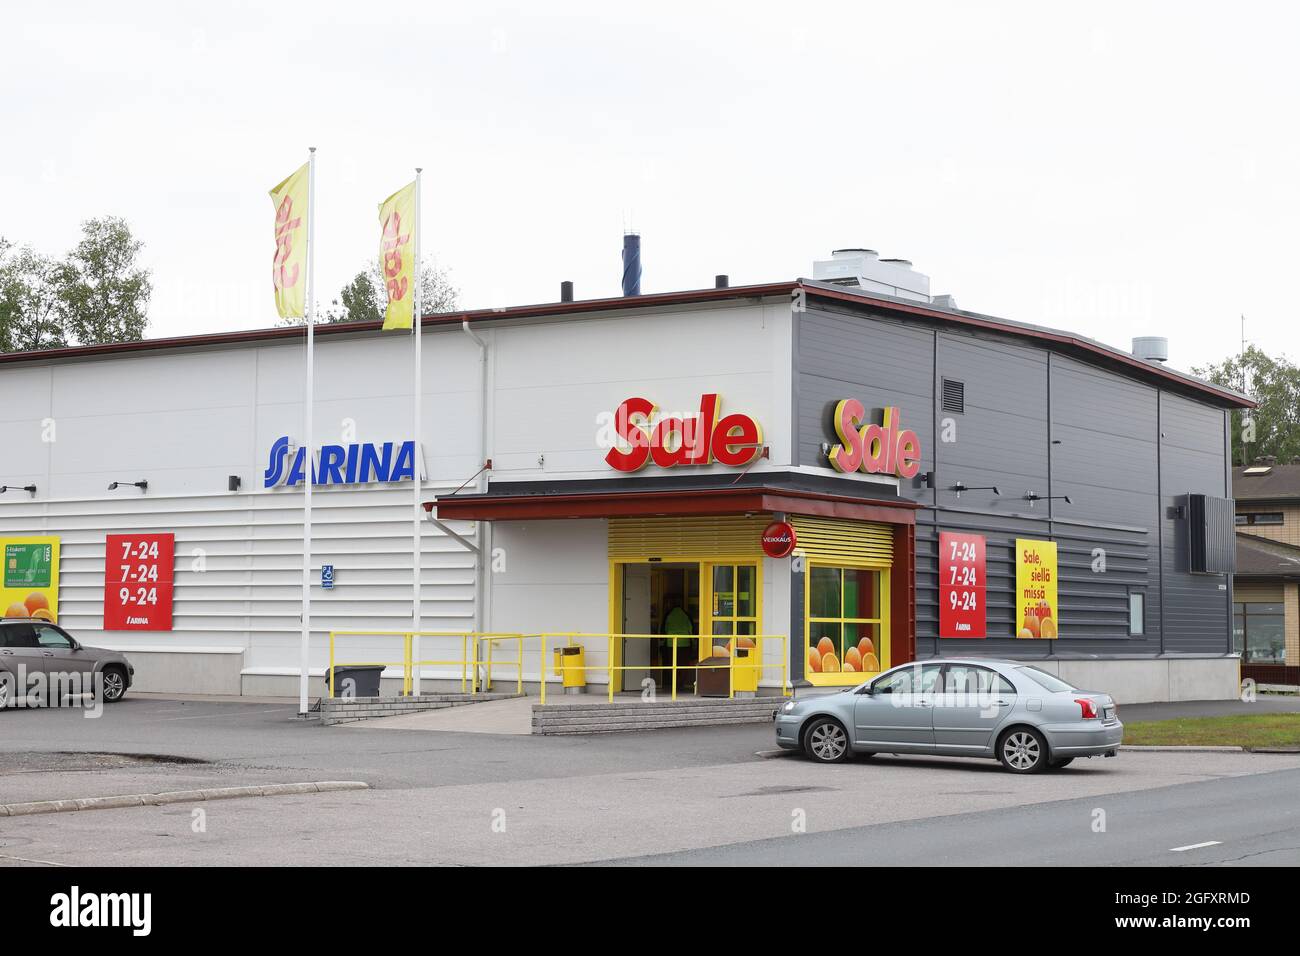 Tornio, Finland - August 22, 2021: Exterior view of the grocery Sale supermarket building beloning to the Finnish retailing cooperative S Group. Stock Photo